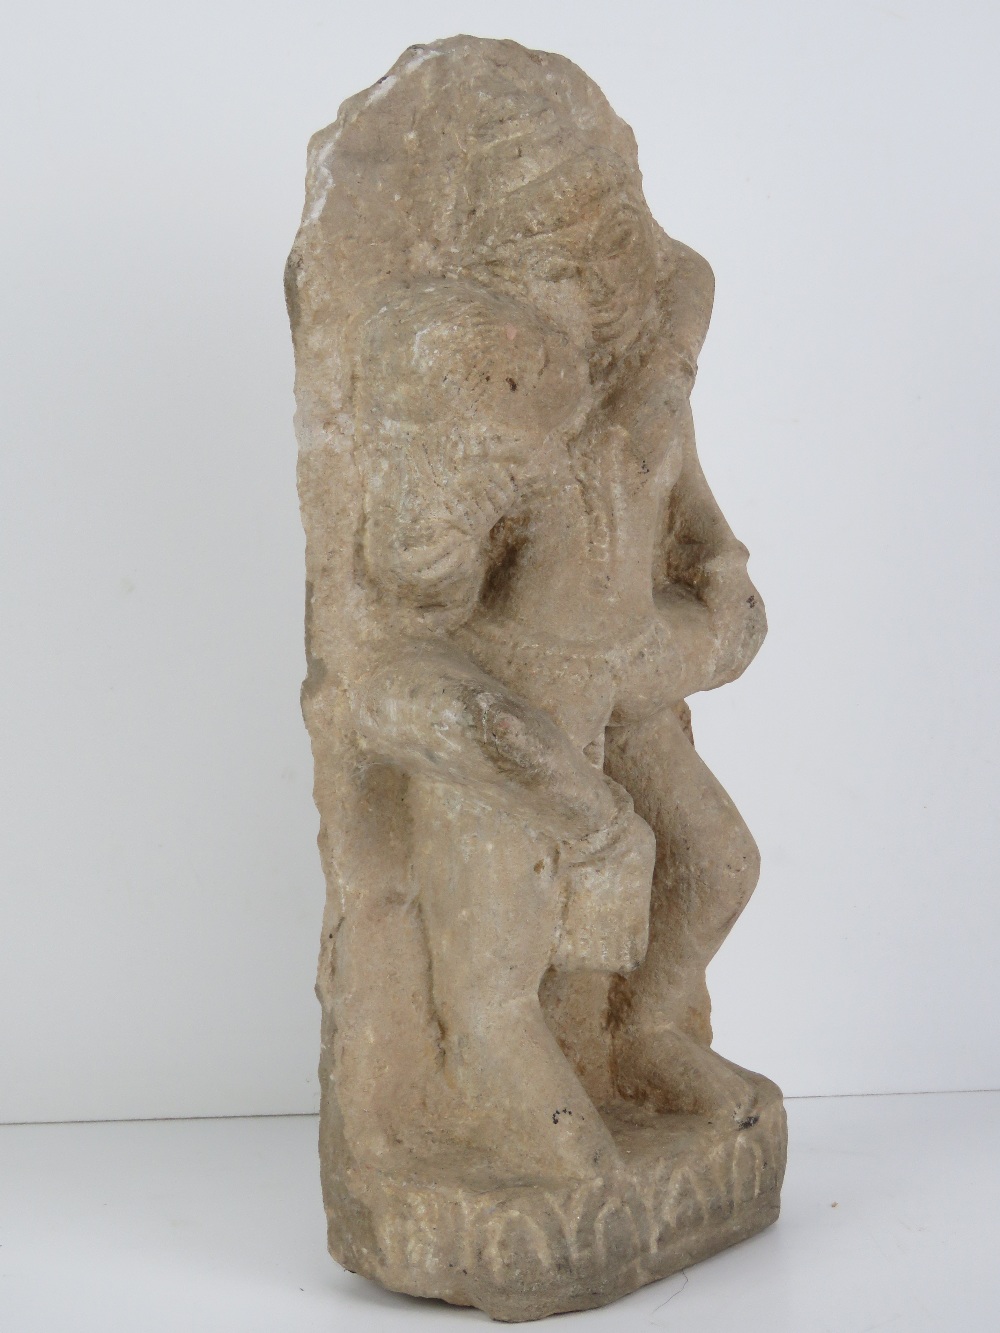 A hand carved stone figurine of Indo Asian erotic influence showing the union between man and woman, - Image 2 of 4